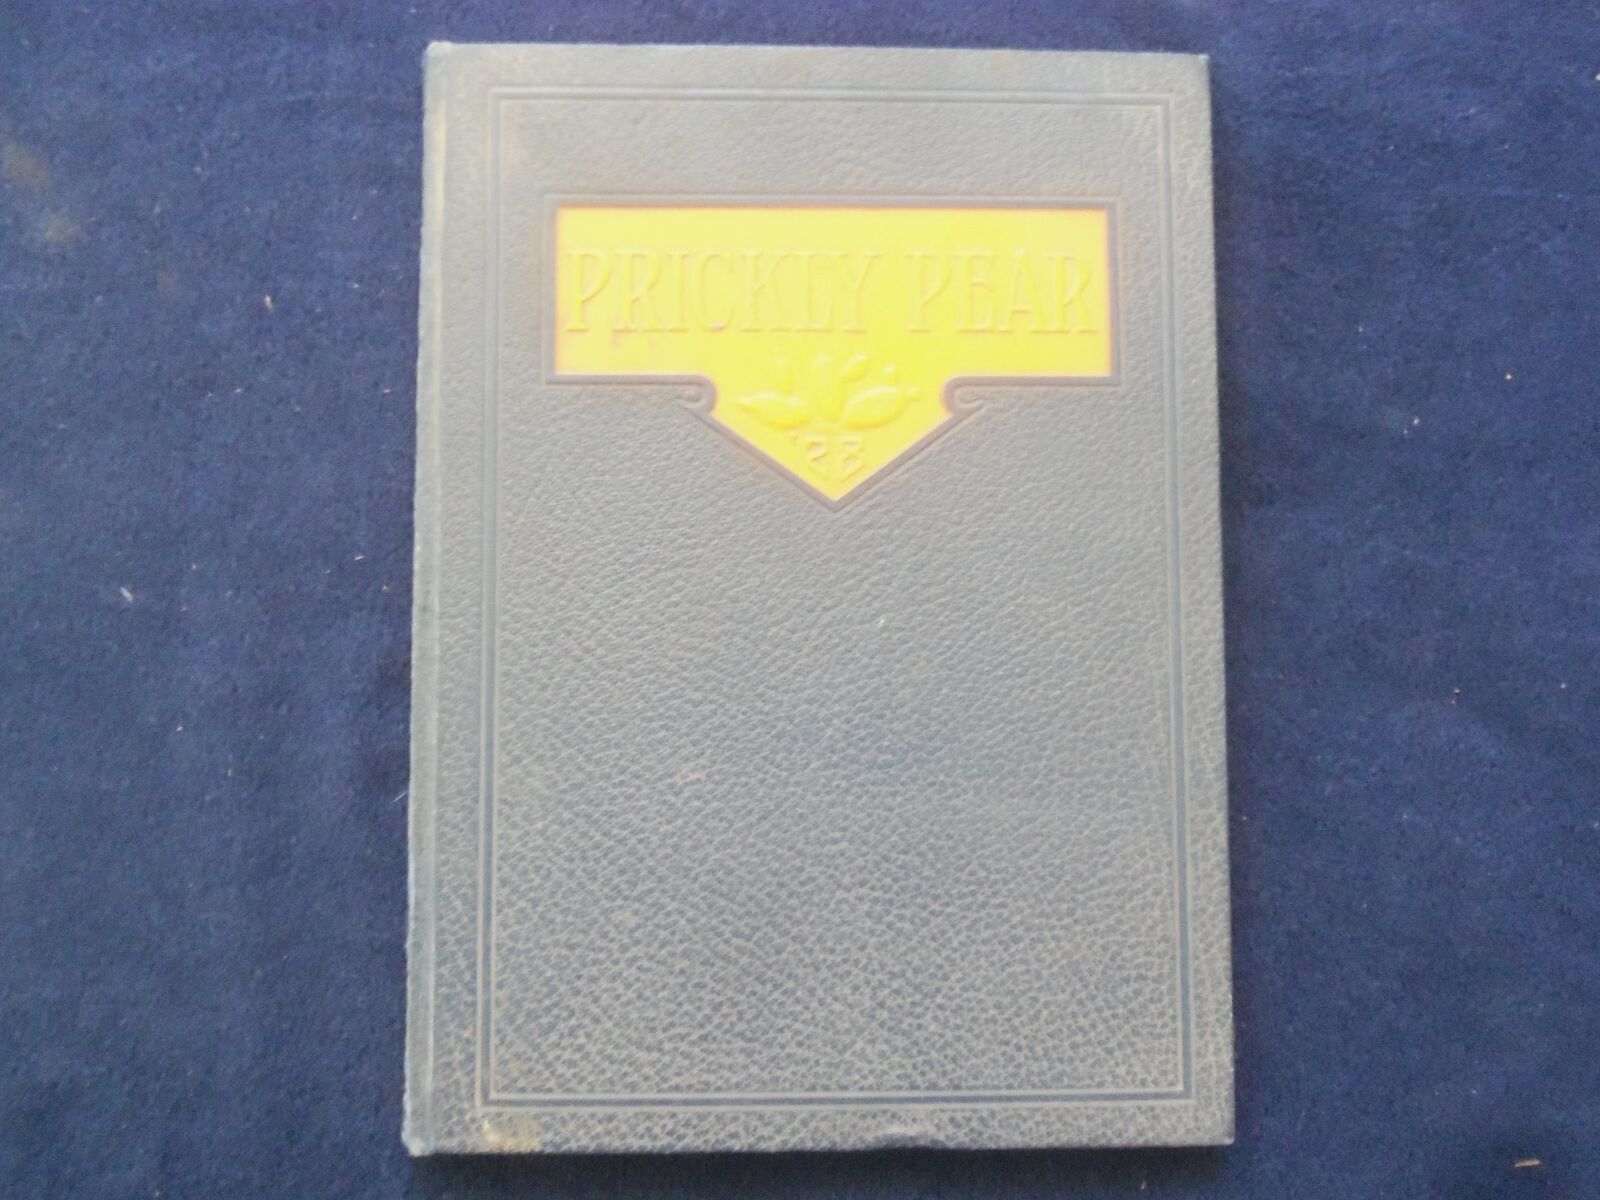 1928 THE PRICKLY PEAR INTERMOUNTAIN UNION COLLEGE YEARBOOK -HELENA, MT - YB 3116